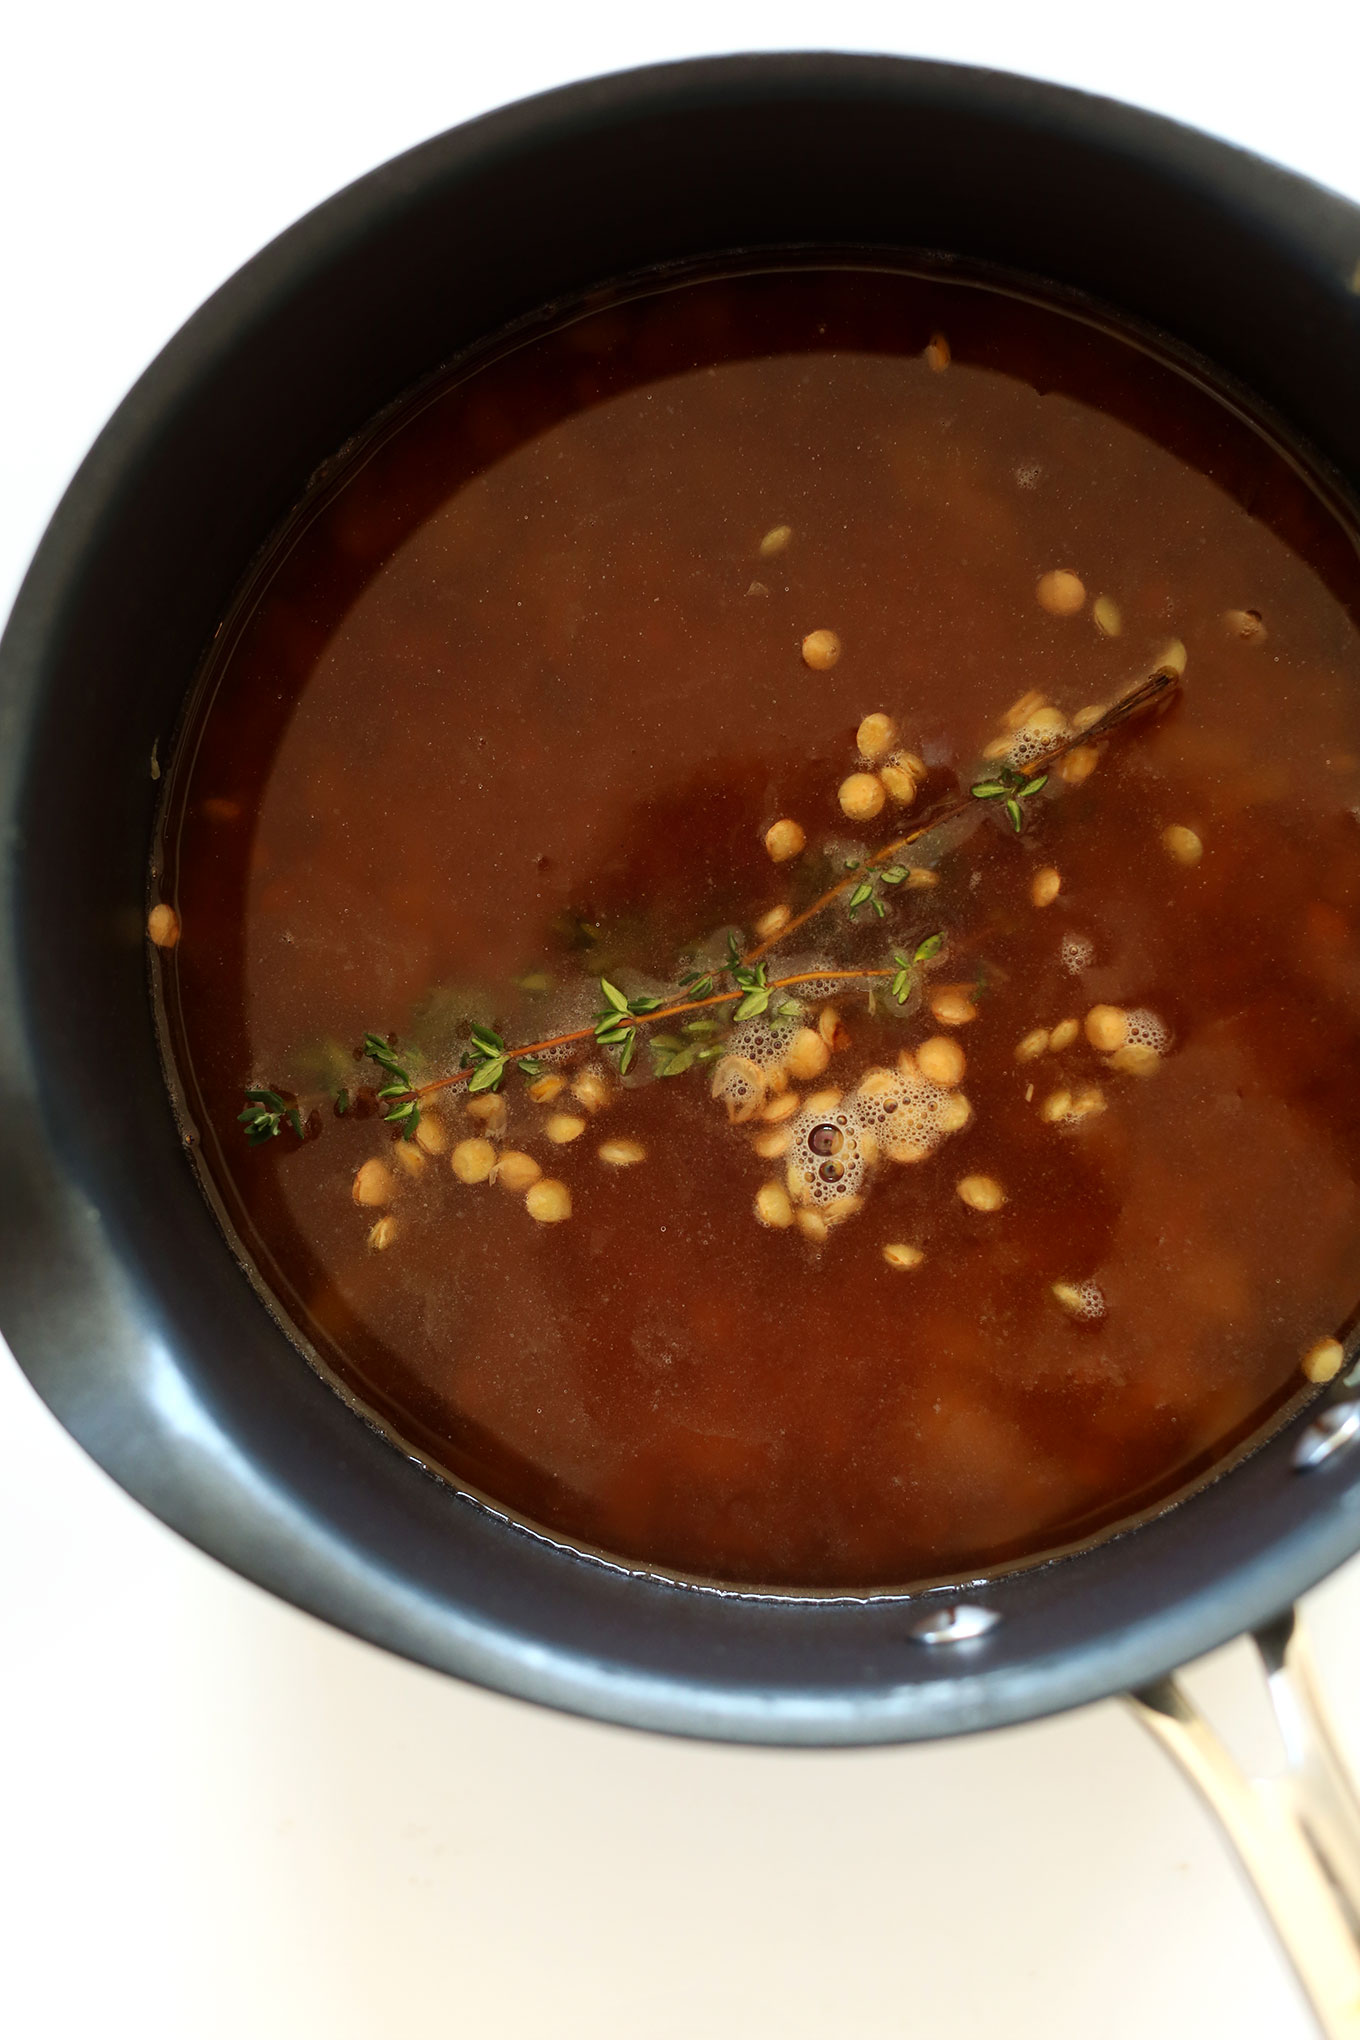 Cooking lentils in broth with fresh thyme sprigs